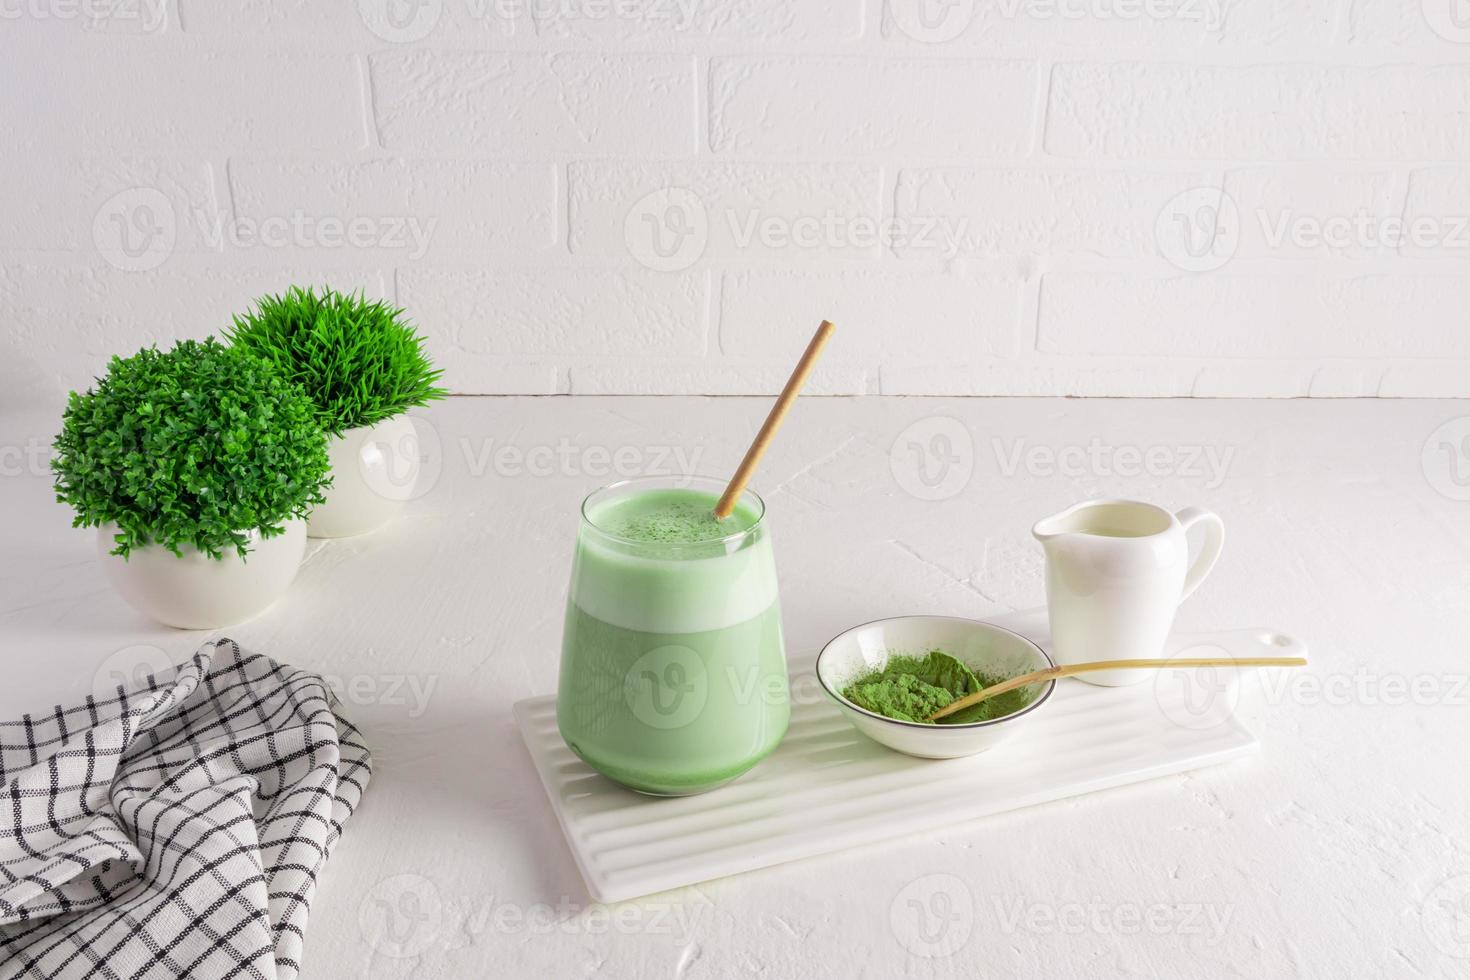 https://static.vecteezy.com/system/resources/previews/017/567/235/non_2x/a-large-glass-of-matcha-latte-green-tea-and-straw-on-a-white-marble-board-against-a-backdrop-of-textured-wall-and-plants-in-pots-detox-photo.jpg